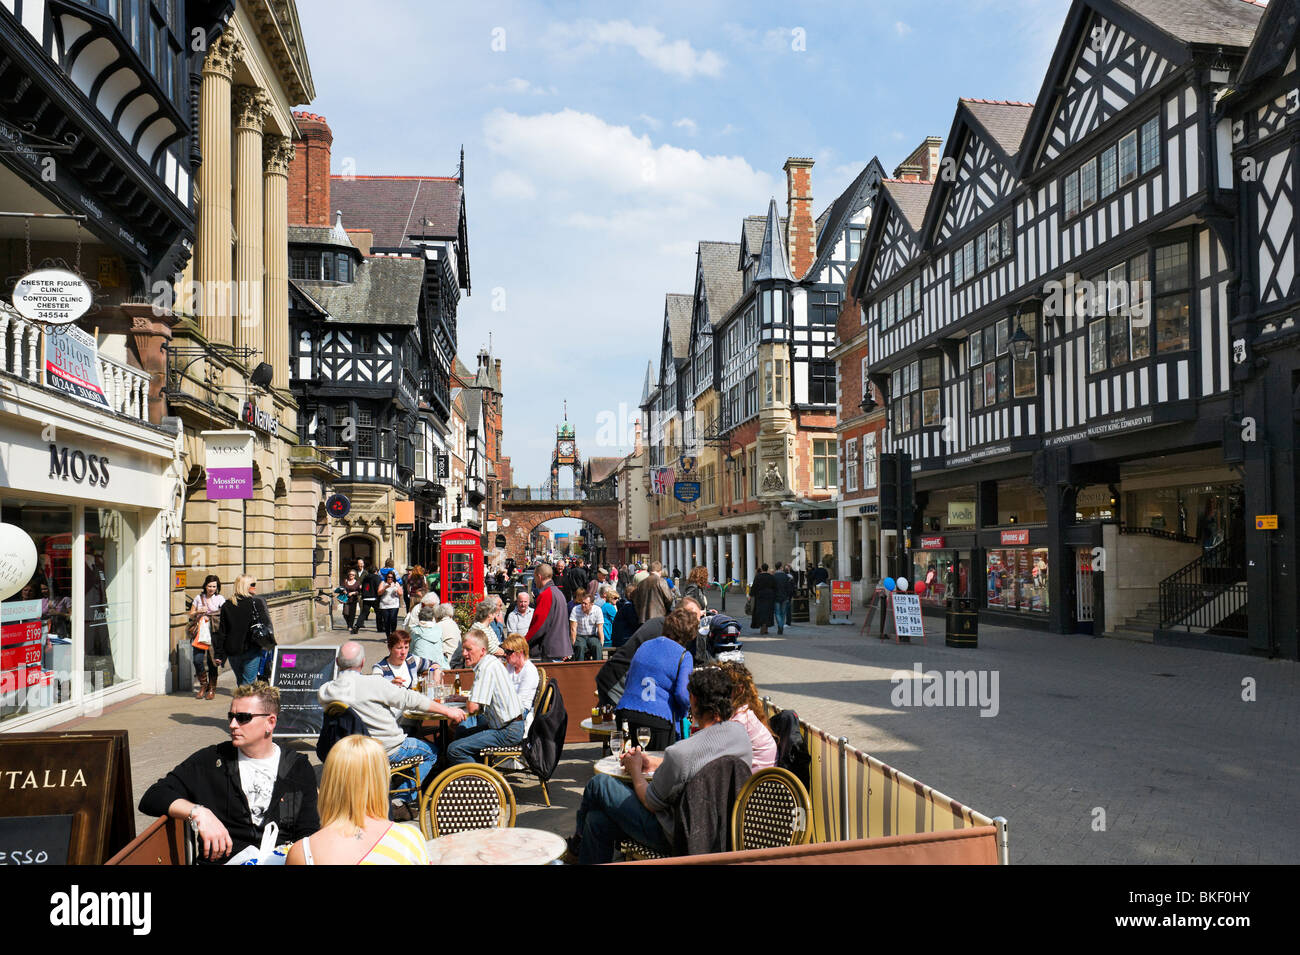 A sidewalk cafe on Eastgate, one of The Rows in the historic centre of Chester, Cheshire, England, UK Stock Photo